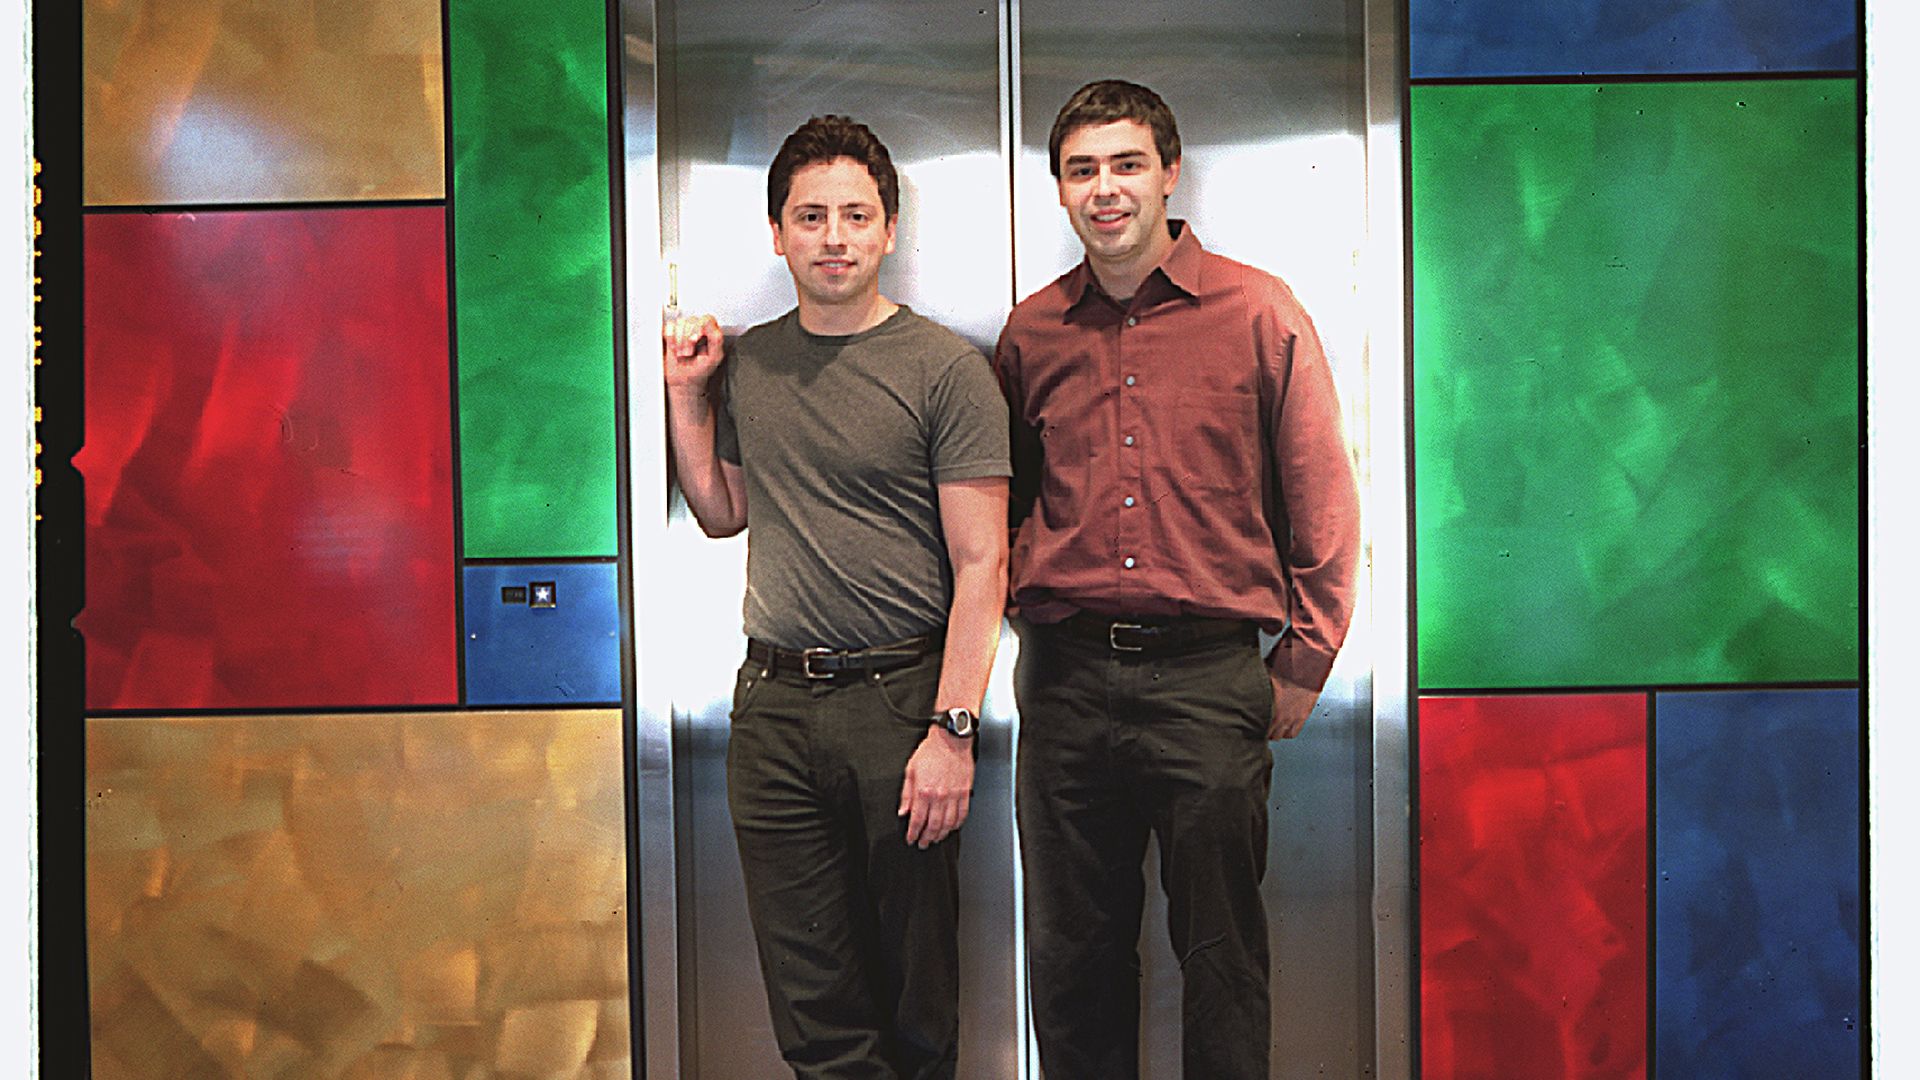 Photo of Google founders Sergey Brin and Larry Page in 2002 leaving an elevator at Google's office